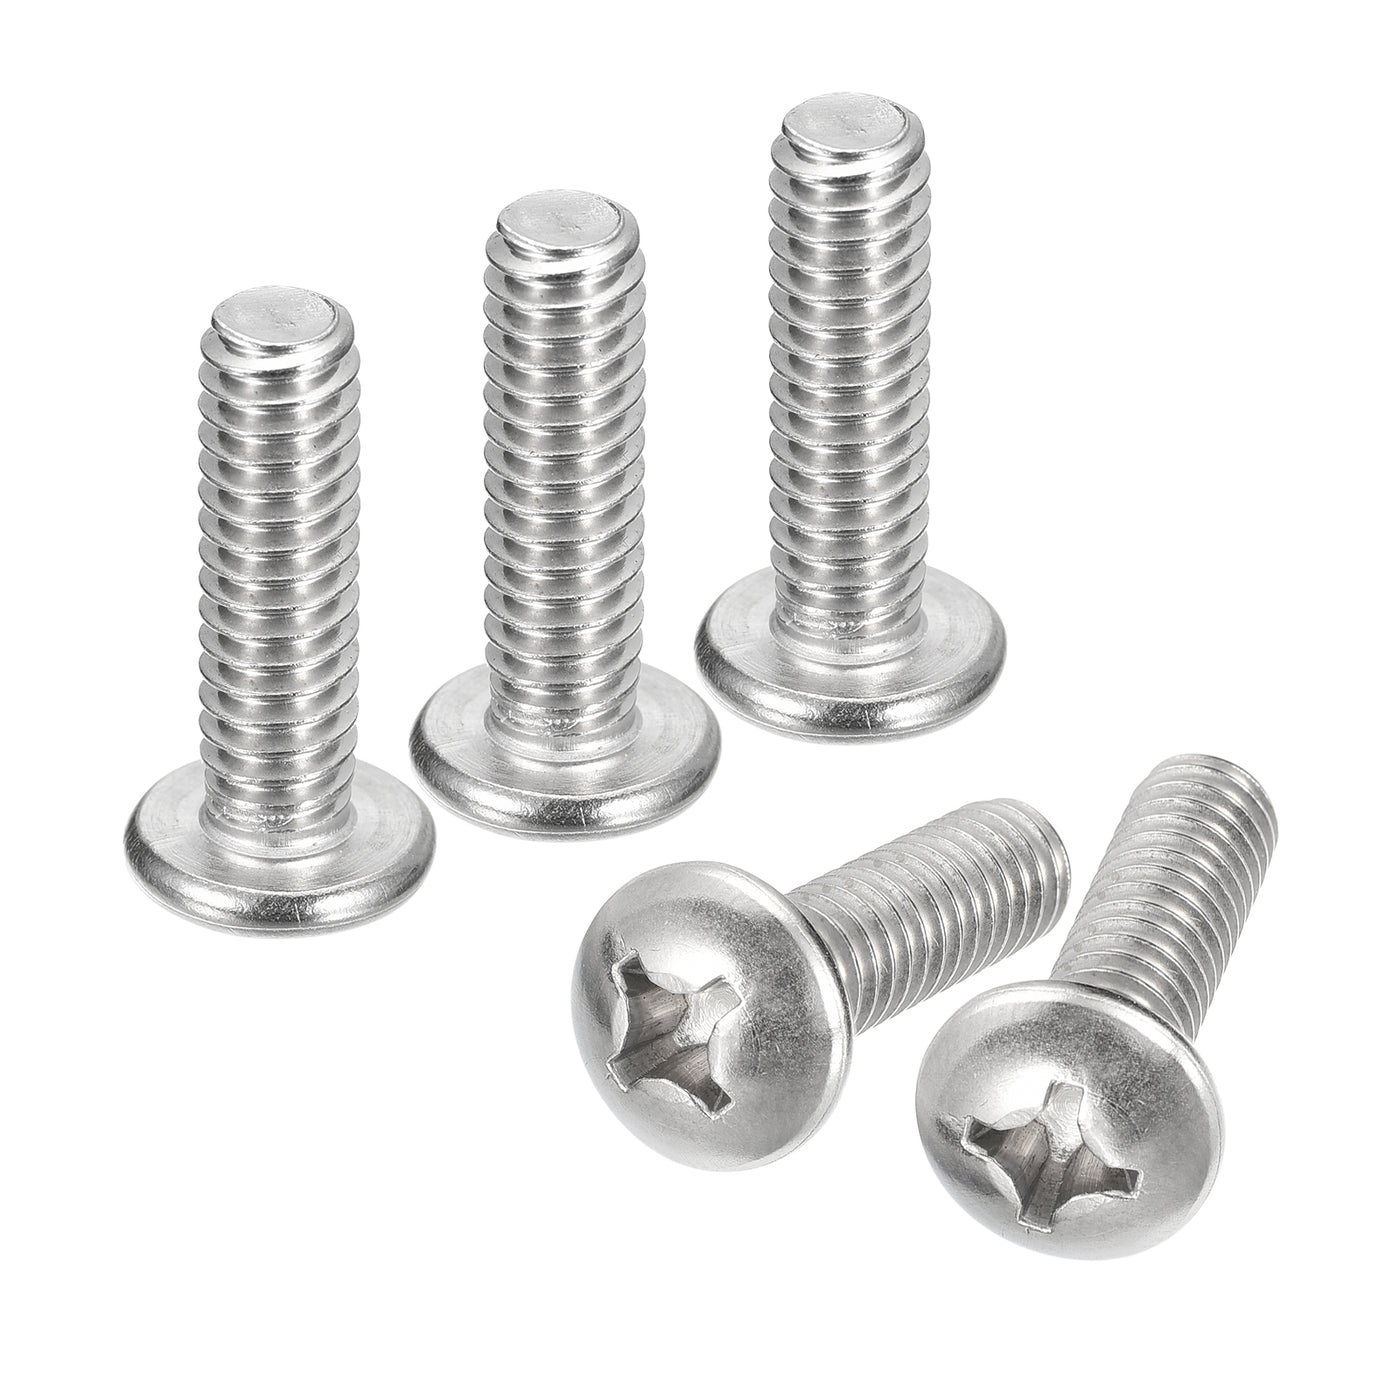 uxcell Uxcell 1/4-20x7/8" Pan Head Machine Screws, Stainless Steel 18-8 Screw, Pack of 25